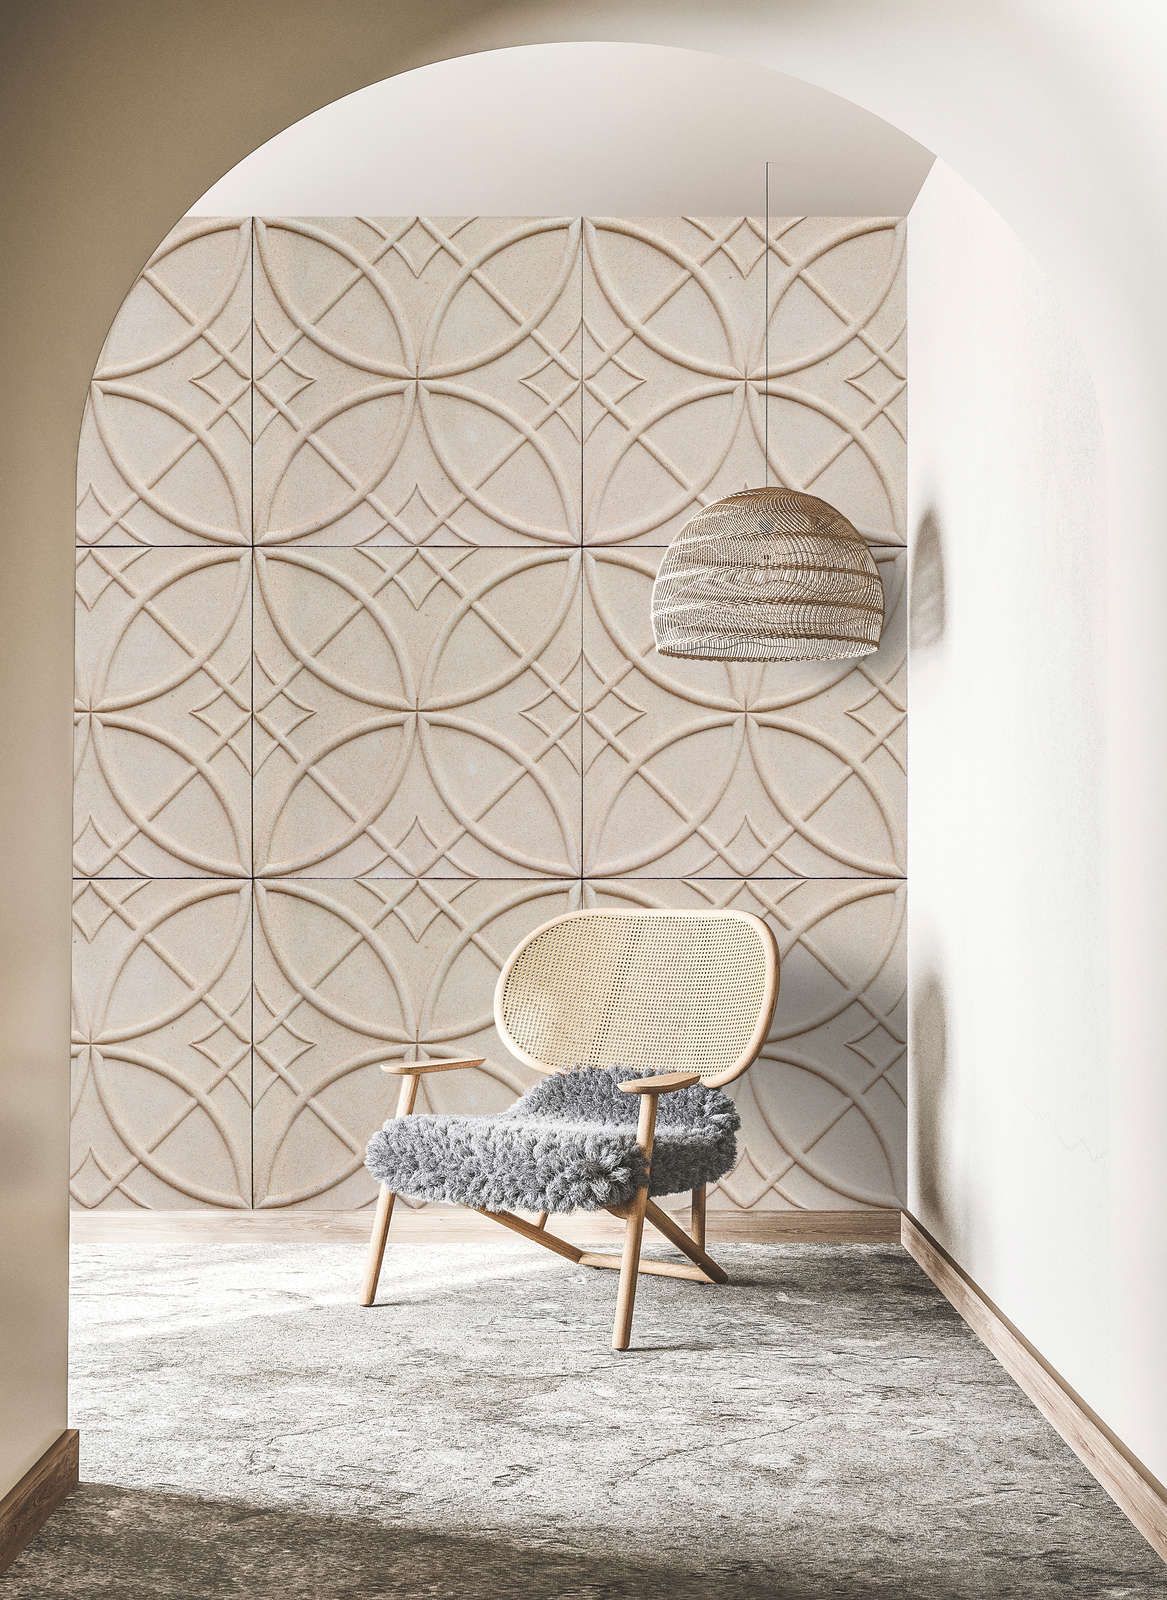             Photo wallpaper »circulus« - Circular pattern on tile look with 3D effect - Smooth, slightly shiny premium non-woven fabric
        